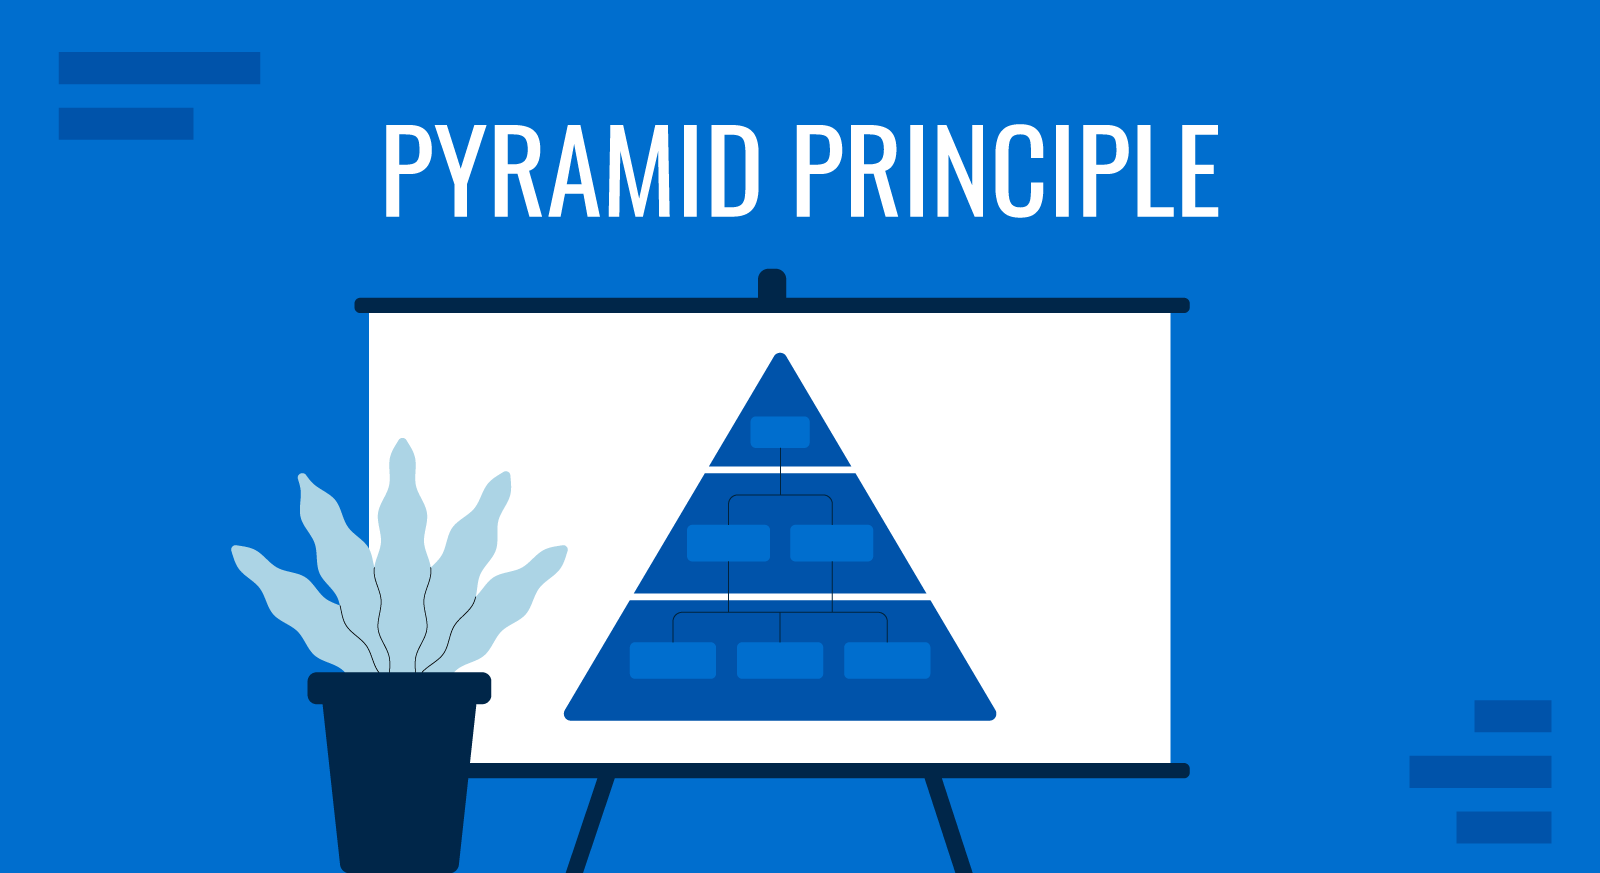 Using the Pyramid Principle to define the presentation structure